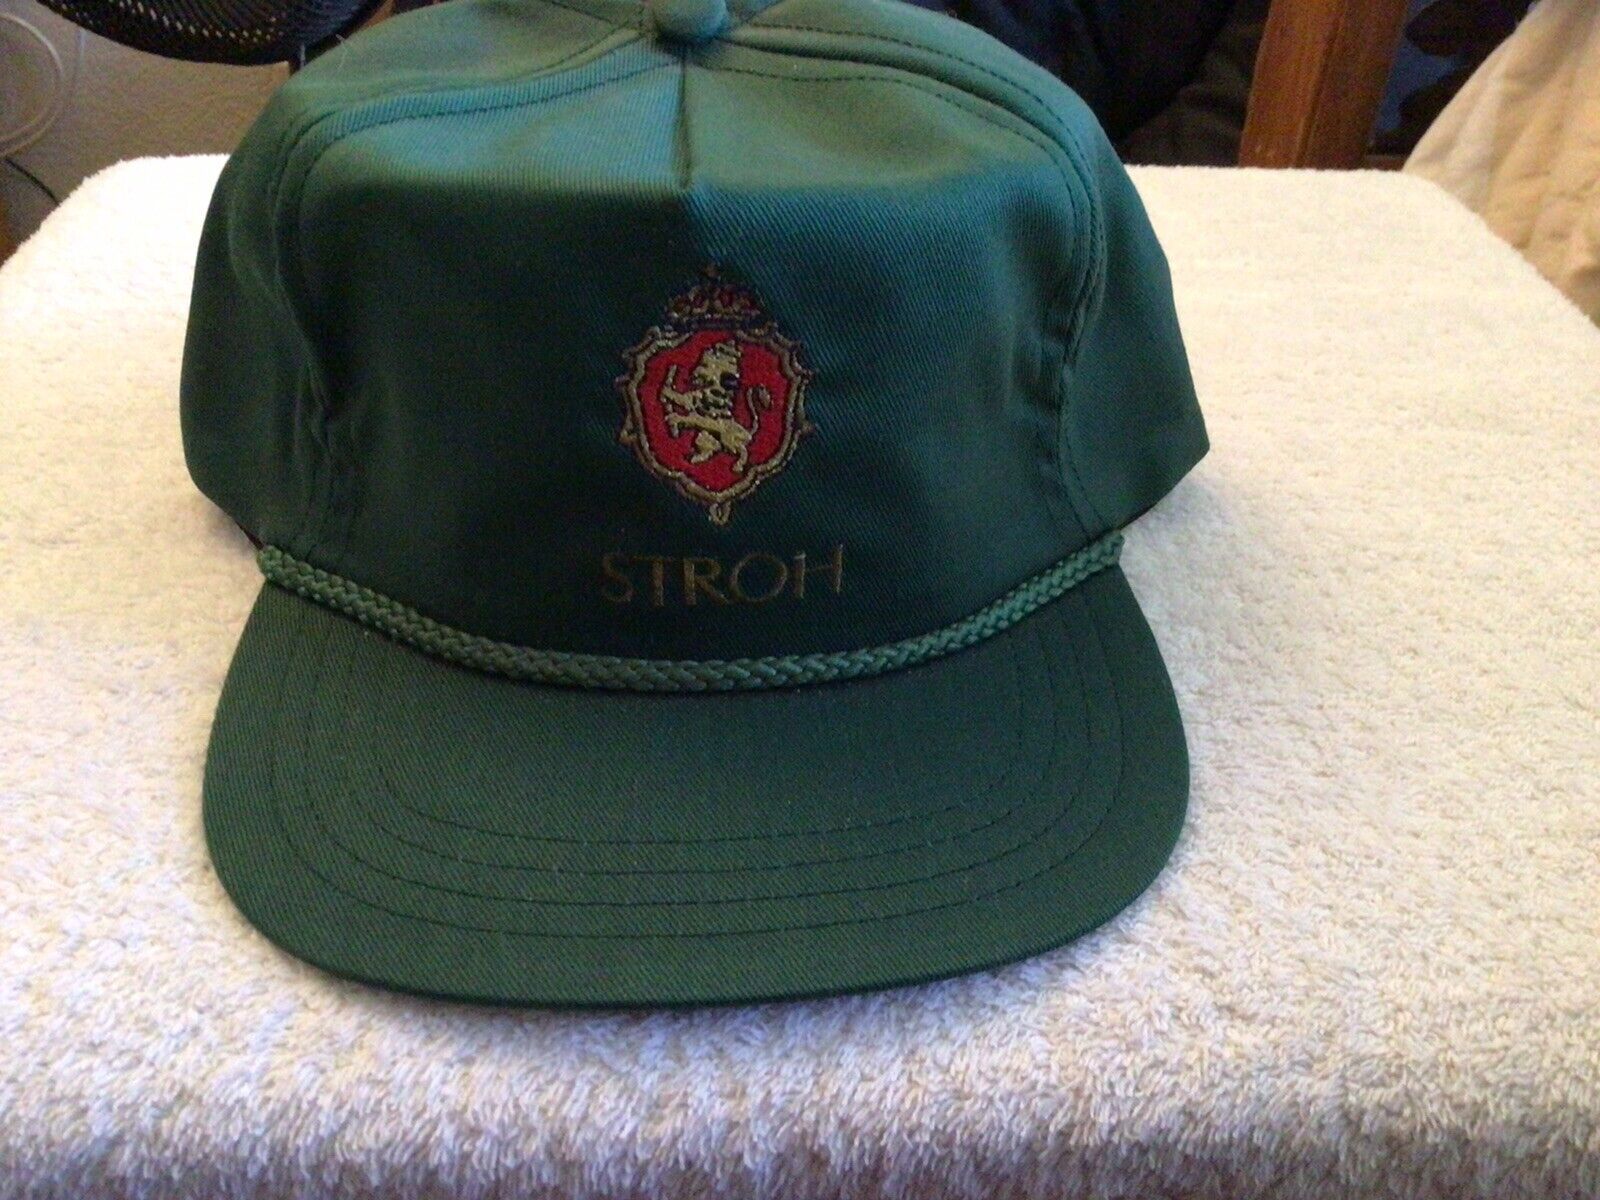 Vintage Stroh's Beer Trucker Style Strap back Hat 80s USA Made BNWOT